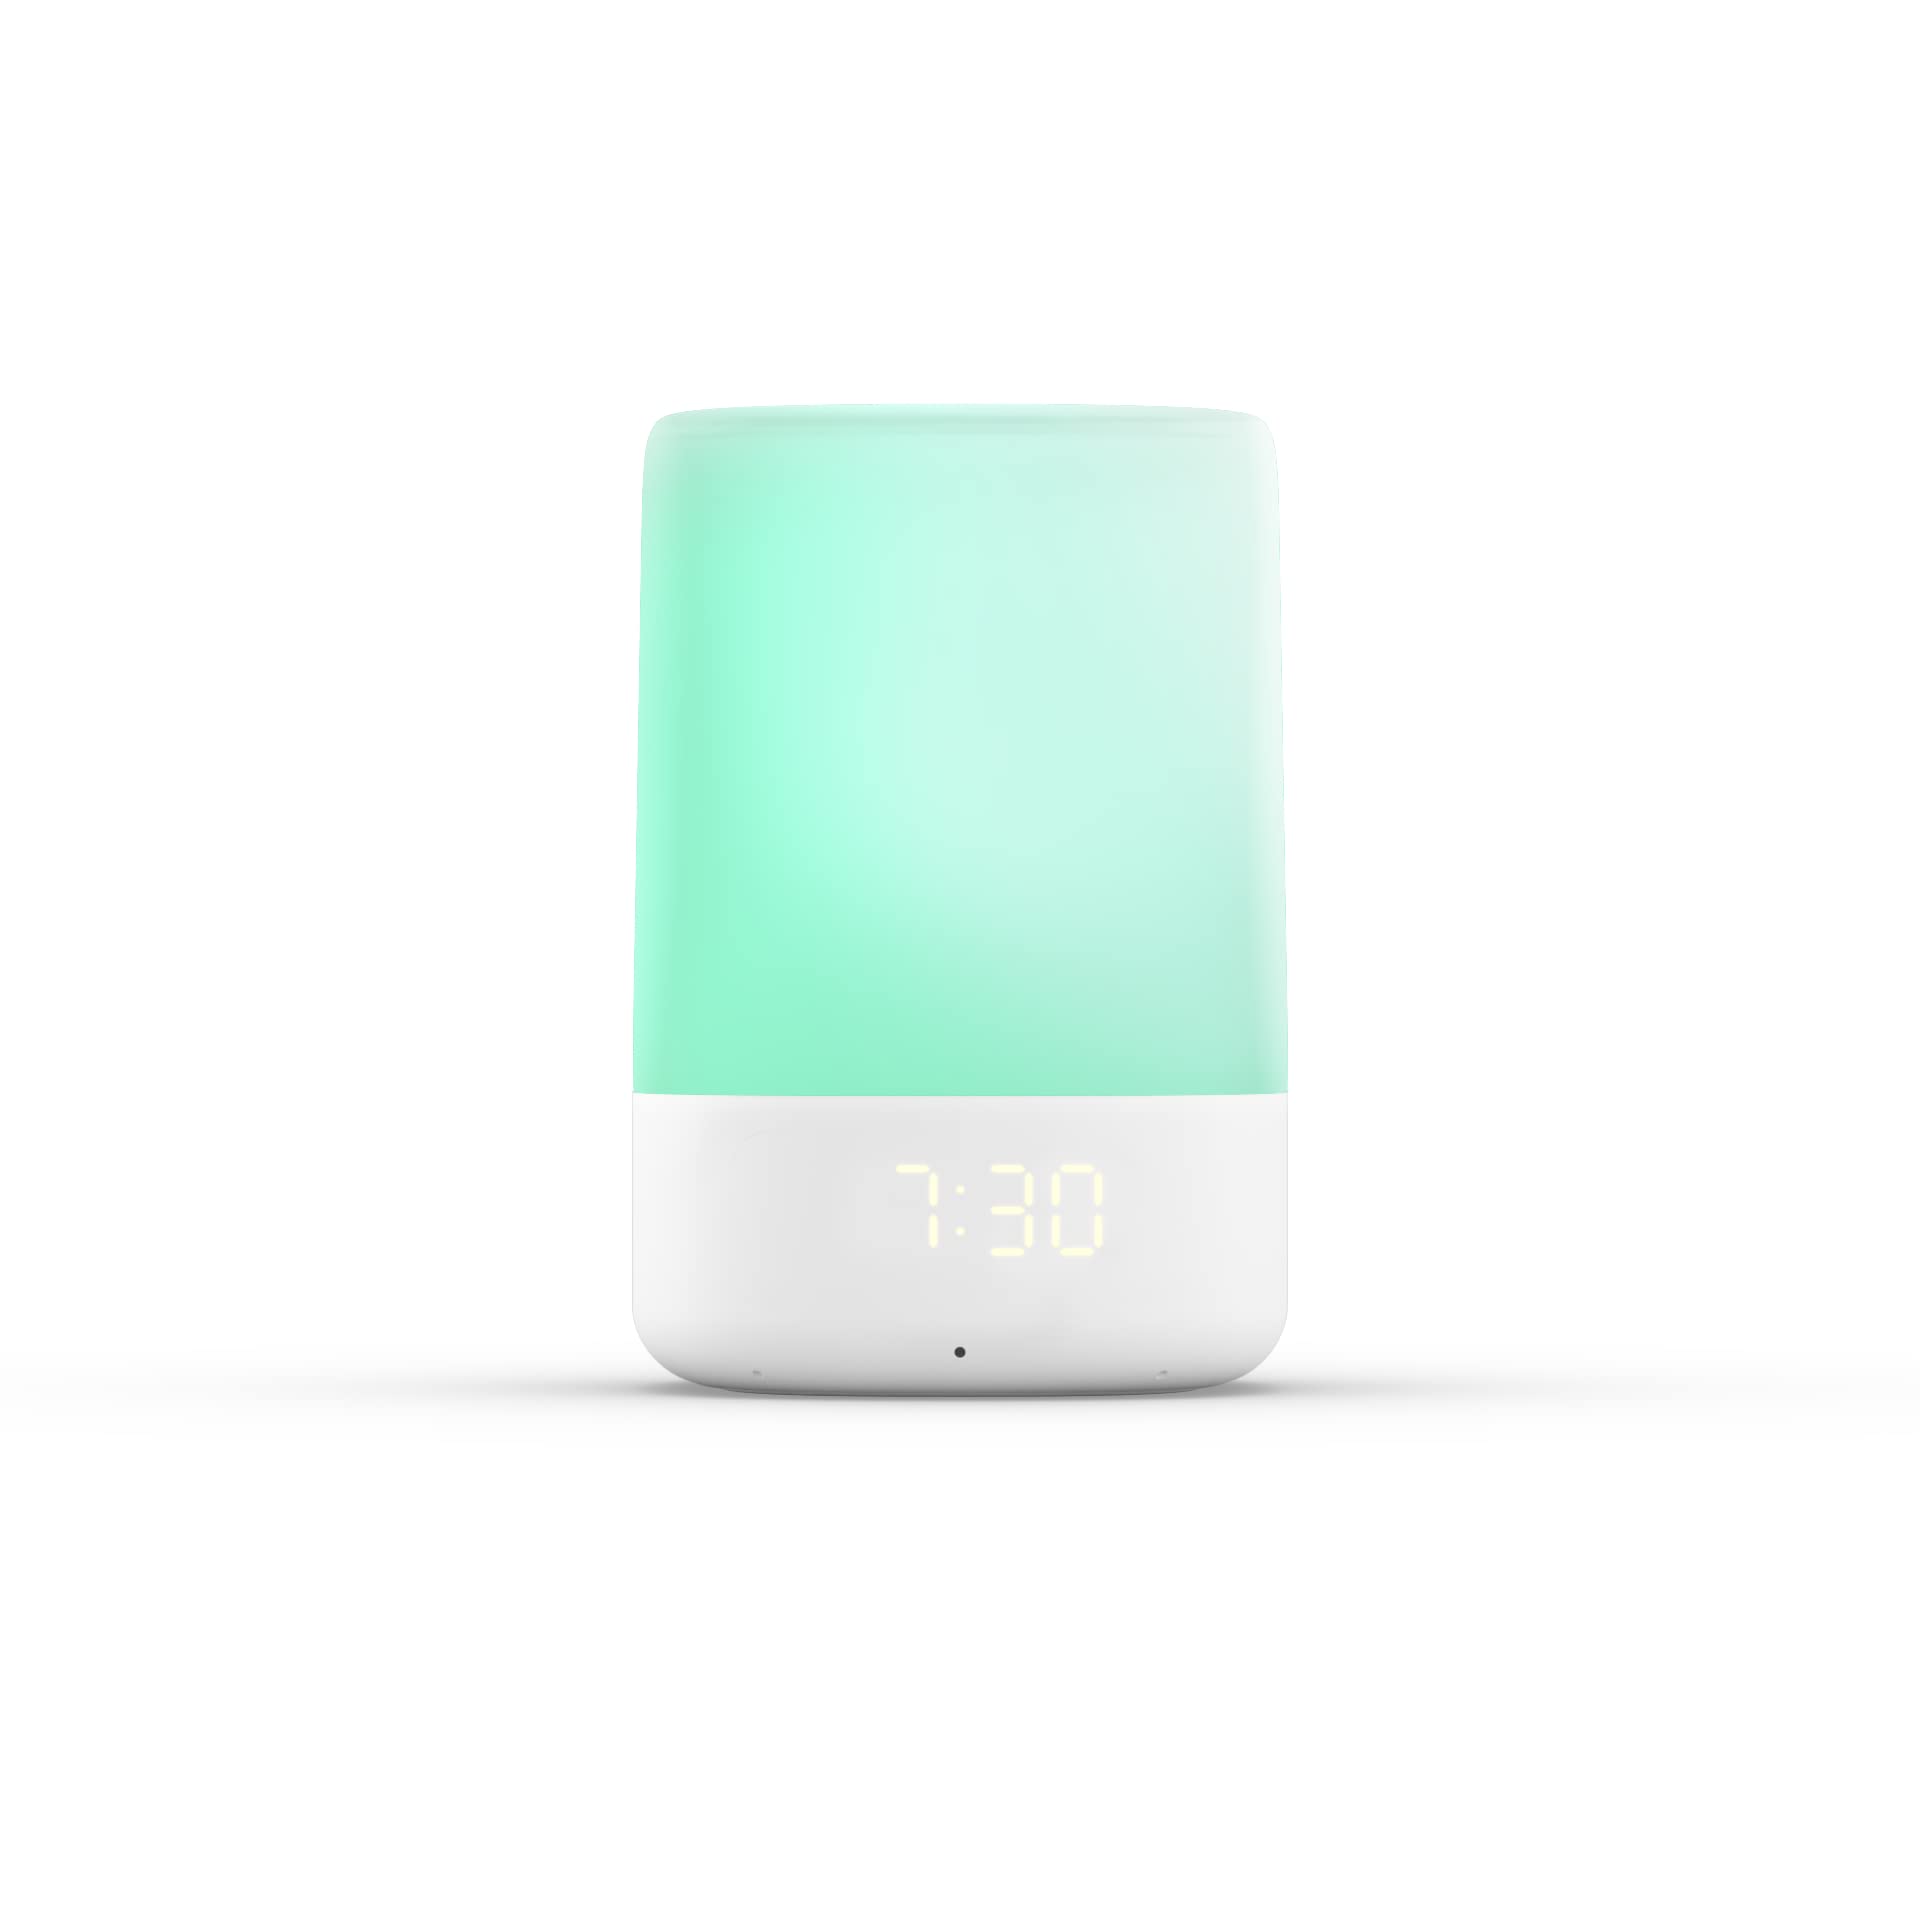 Nanit Sound and Light Smart Baby Night Light and Sound Machine | Cry Detection Alert Feature | OK to Wake Alarm Clock for Kids | Rechargeable Battery | WiFi